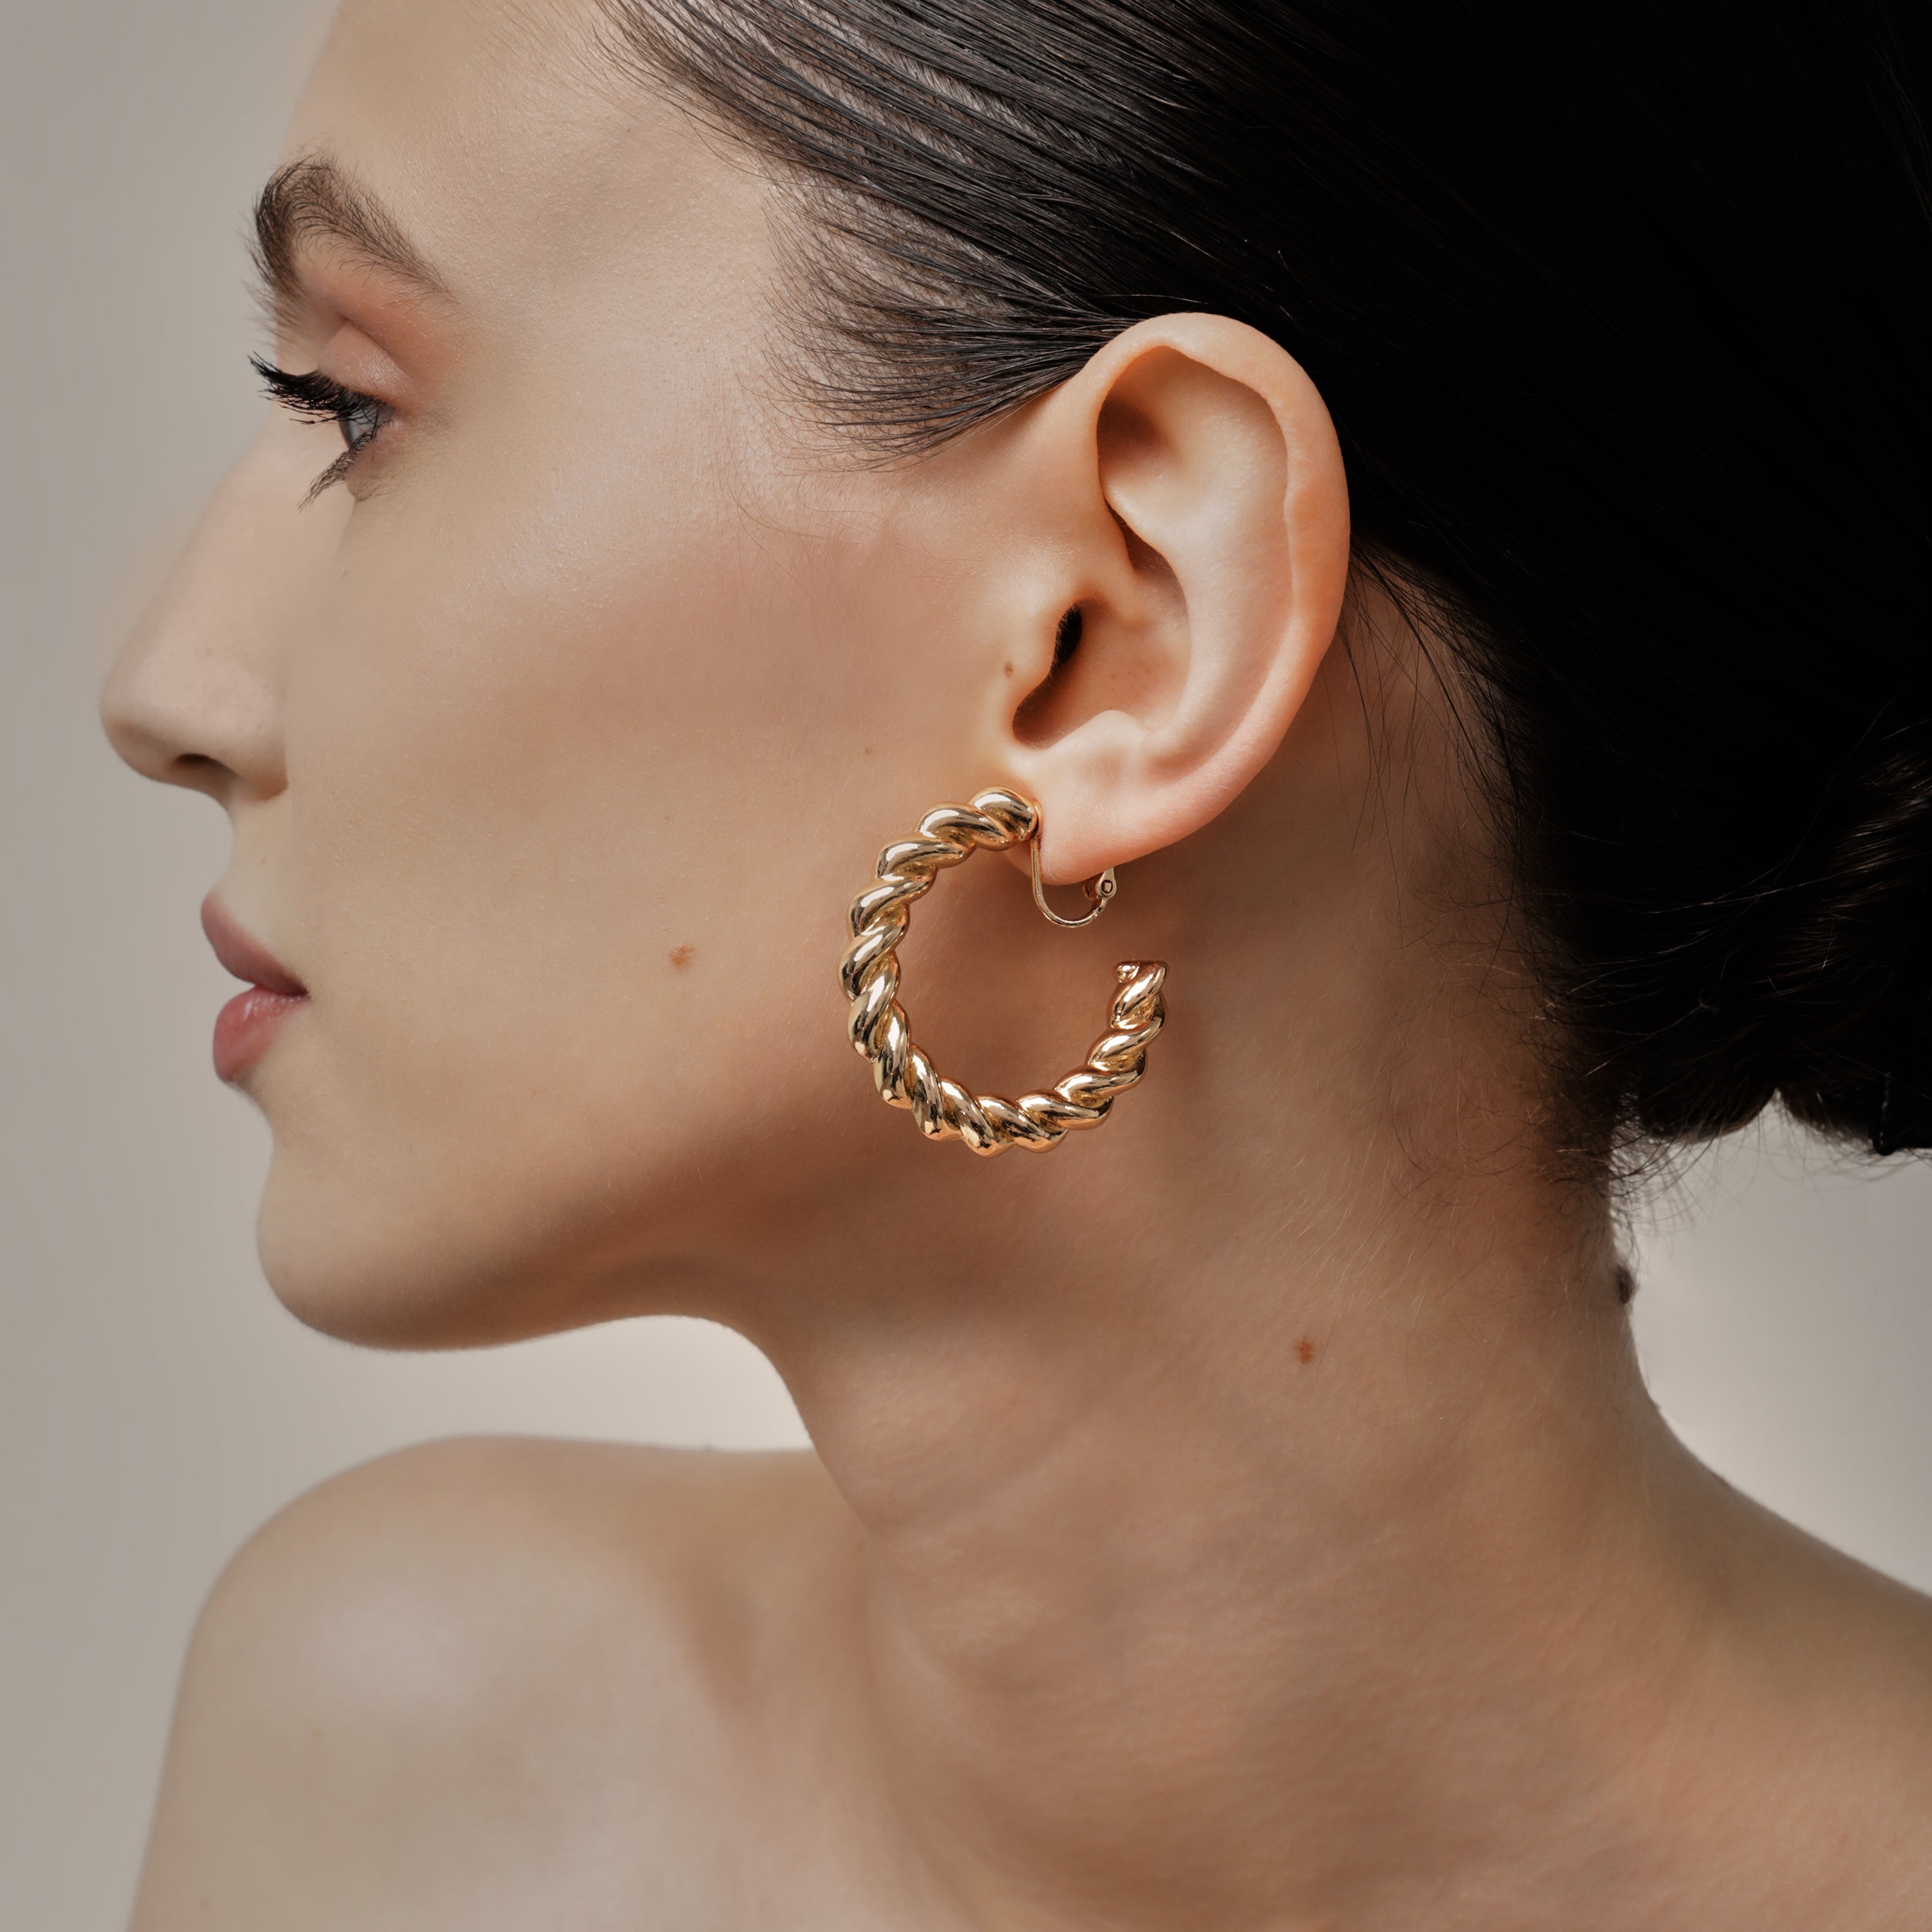 A model wearing the Large Croissant Hoop Clip On Earrings in Gold. These elegant hoops are equipped with a secure screwback closure and adjustable fit to keep them in place all day, even for those with sensitive or keloid prone ears. Enjoy up to 12 hours of comfortable wear in style.